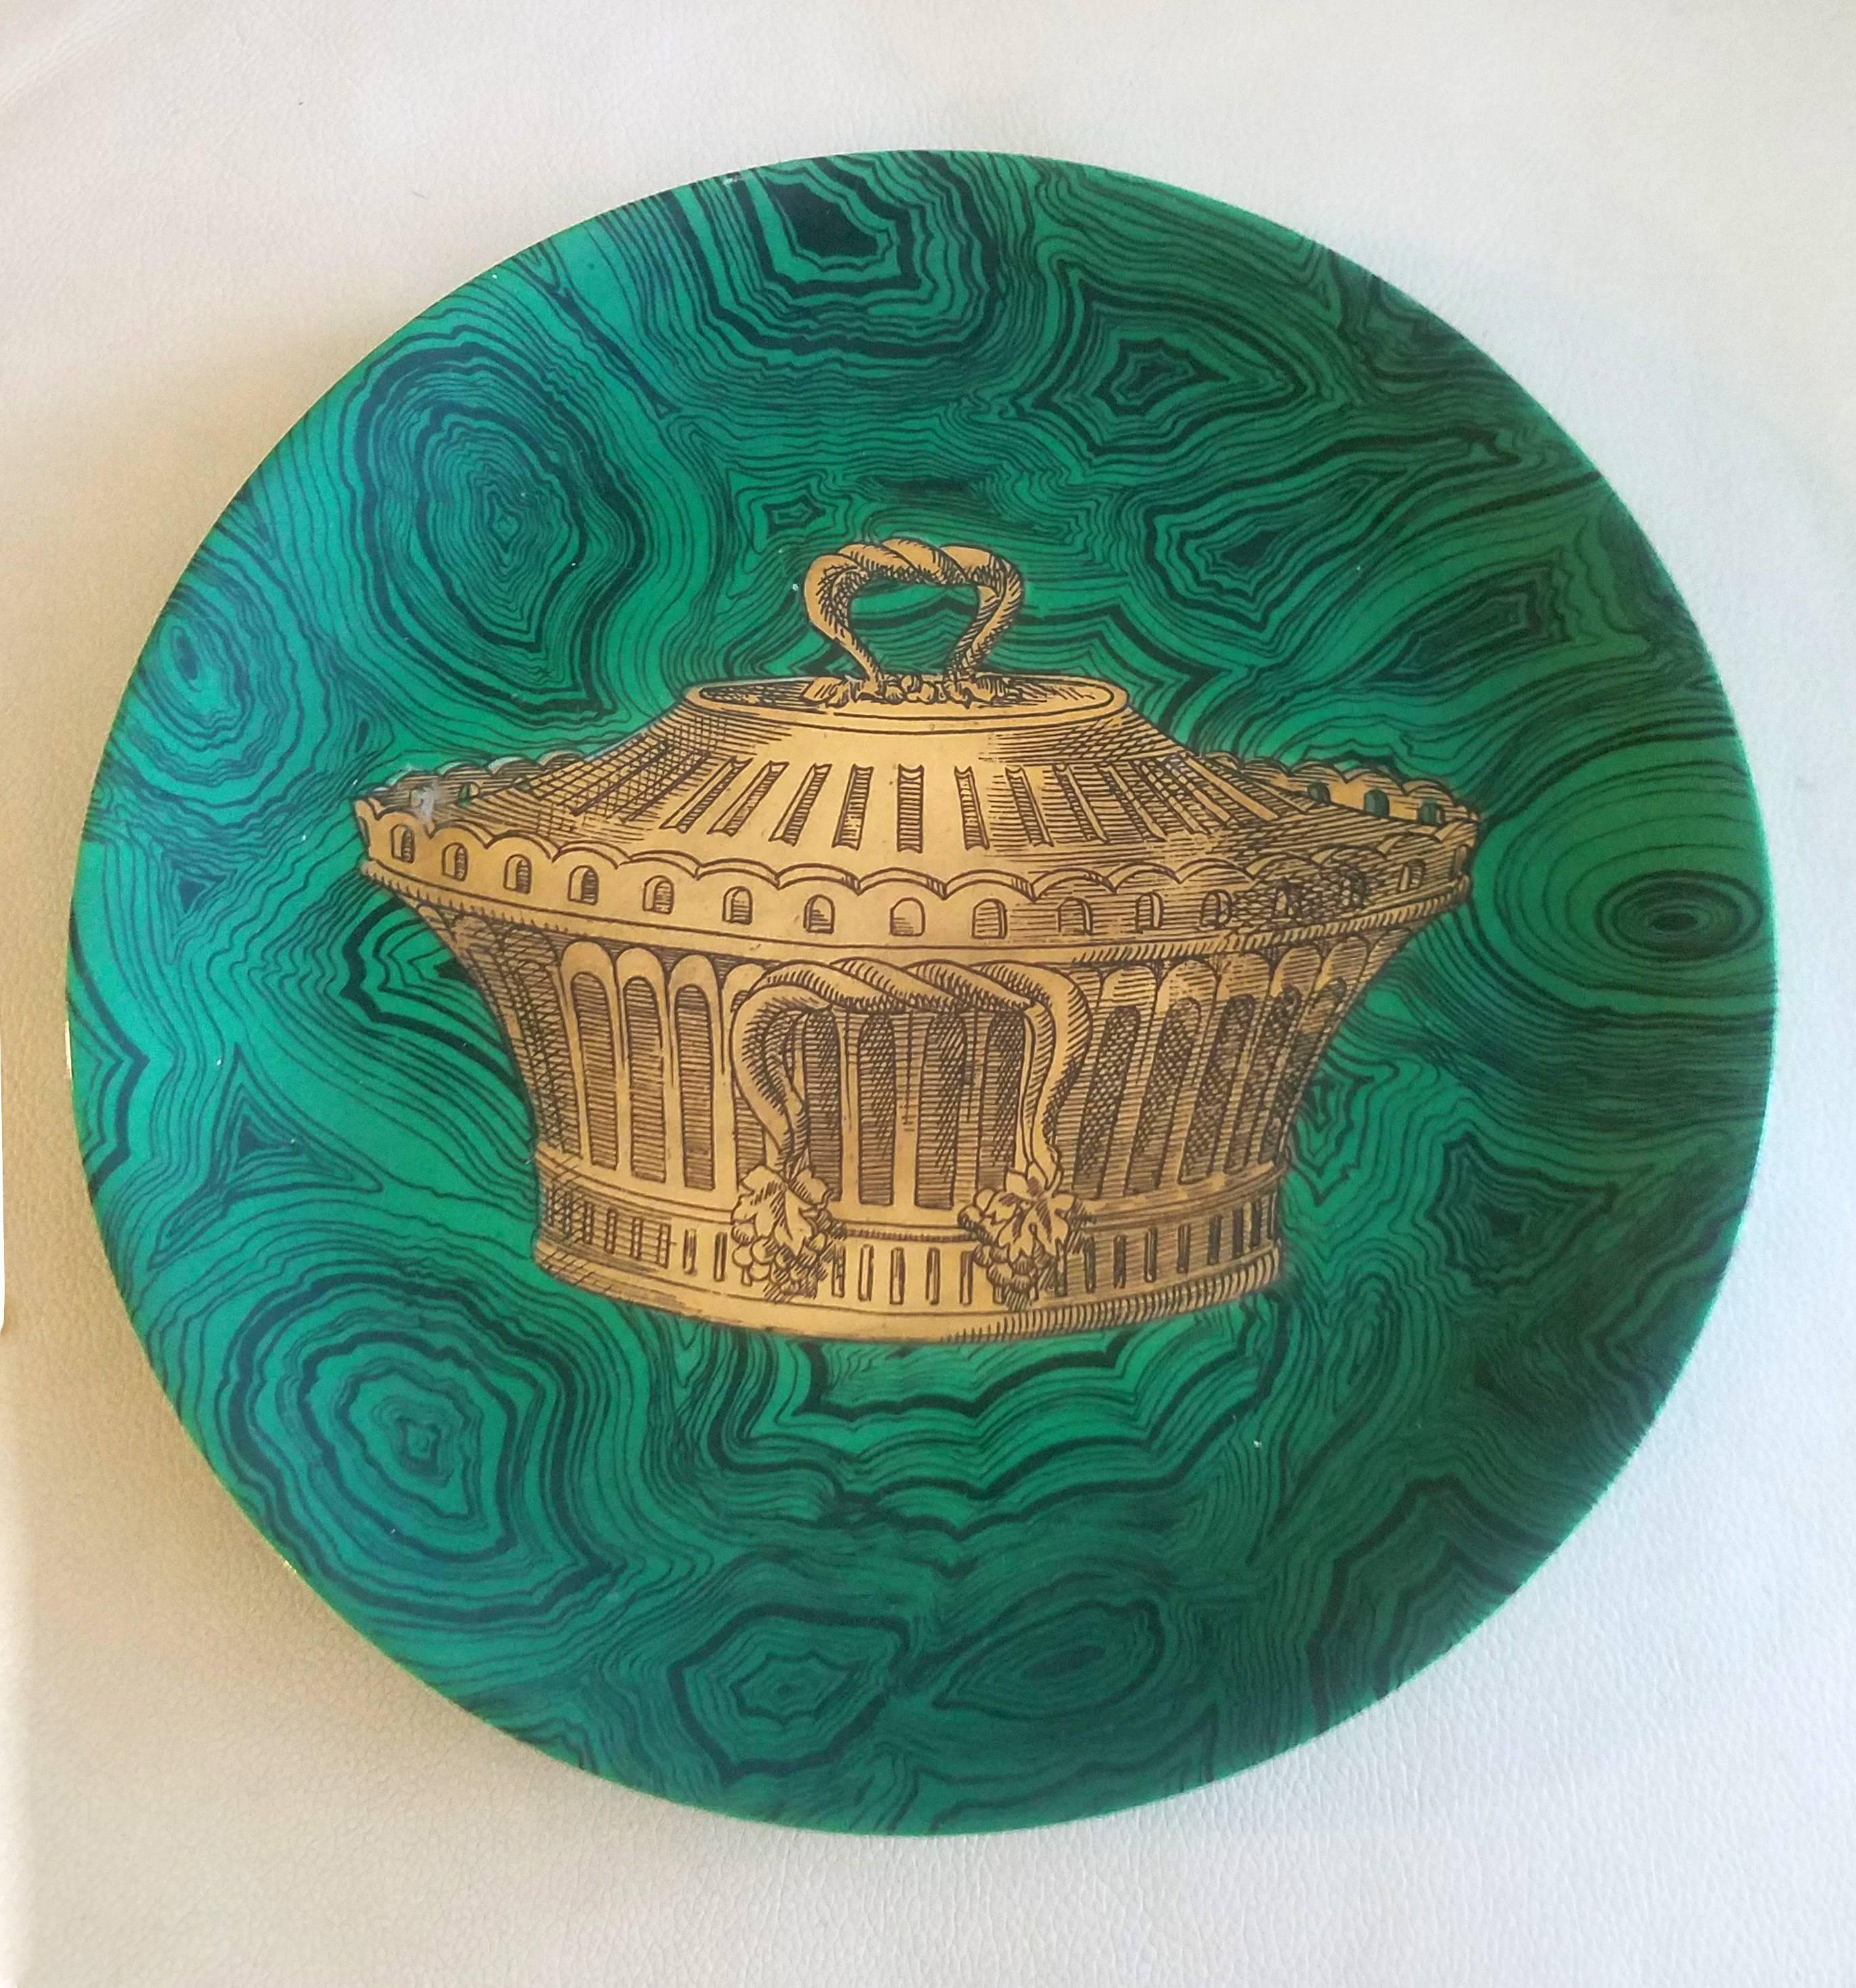 Piero Fornasetti 12 Stoviglie malachite plates,
1950s-1960s.

The 12 plates, numbered 1-12, each have a green malachite ground and are painted in gold with different gold forms used for serving food, tea, coffee and drinks.

Reference: